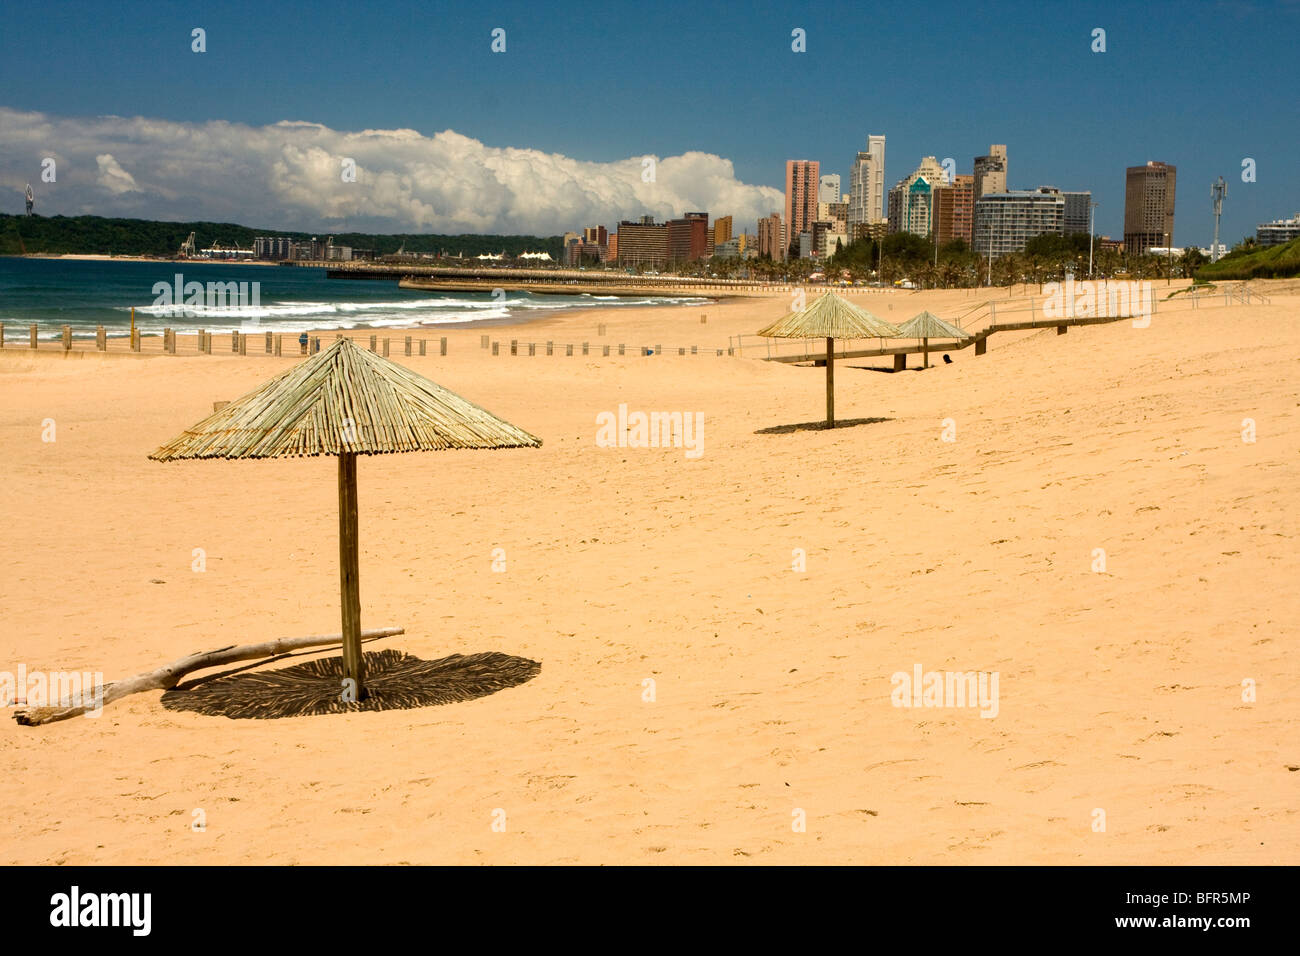 View of Durban city skyline from Pirate's Beach Stock Photo